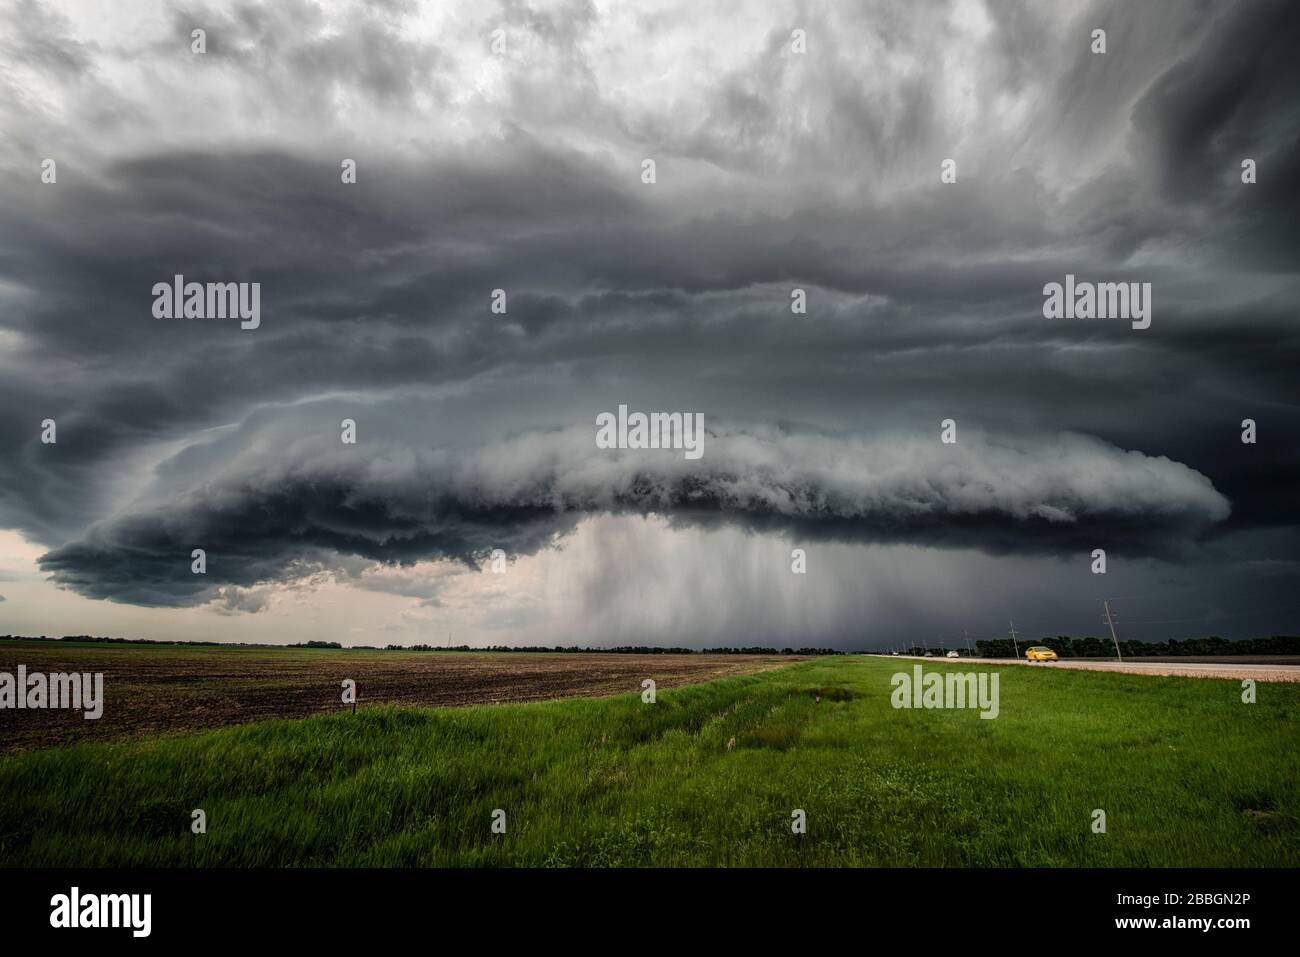 Storm with shelf cloud over rural sunflower field in southern Manitoba Canada Stock Photo